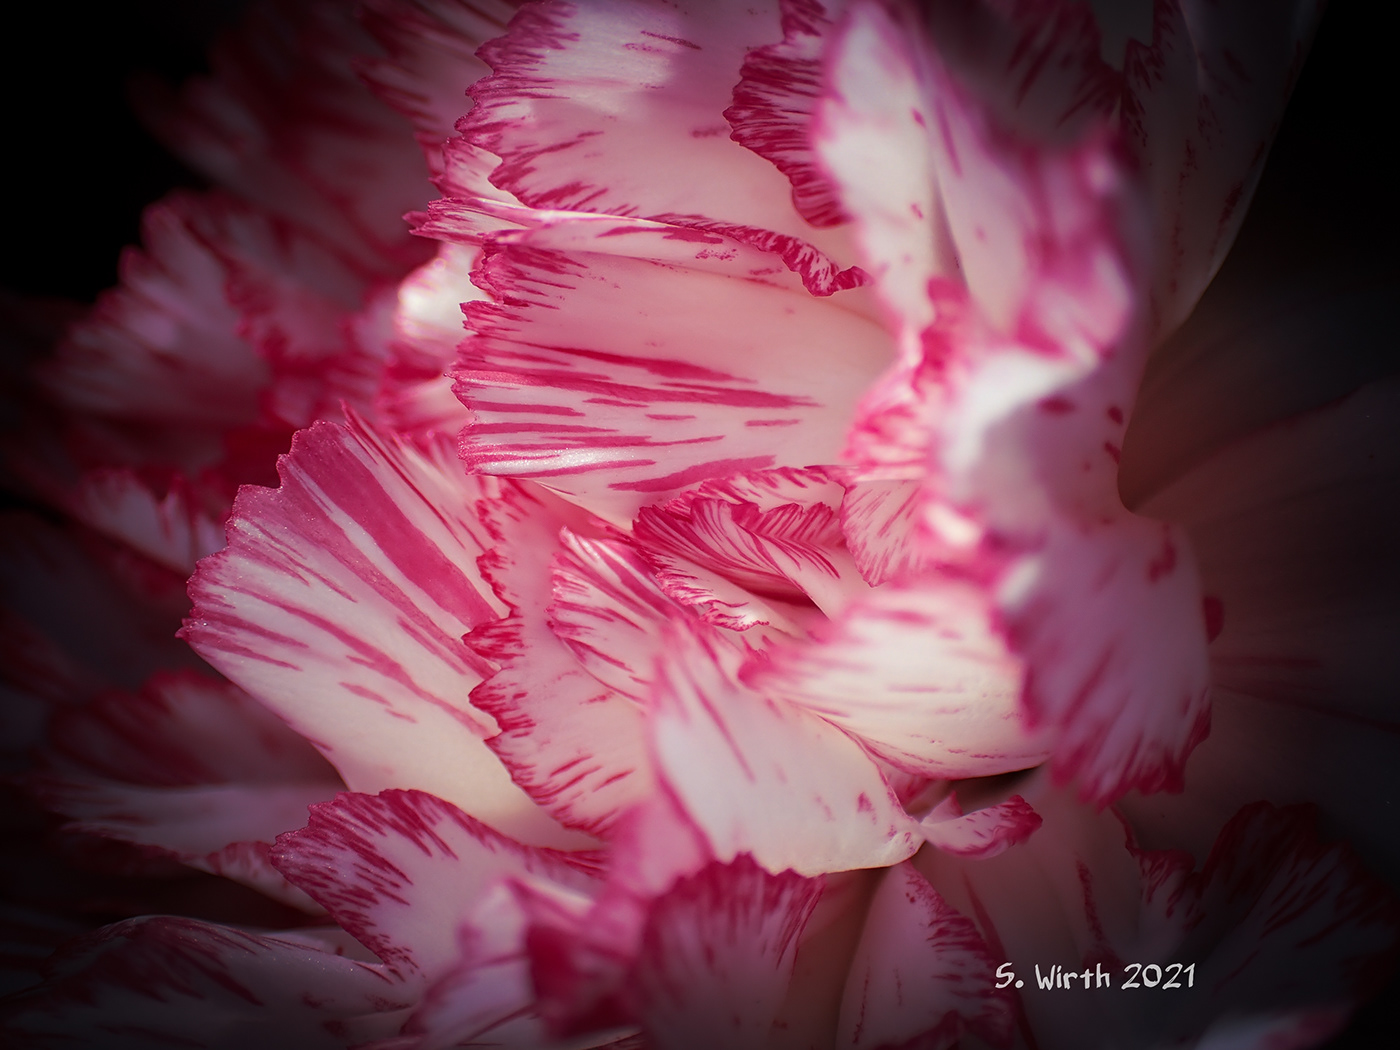 art blossoms carnation clove droplets dying March 2021 Stefan F. Wirth story withering